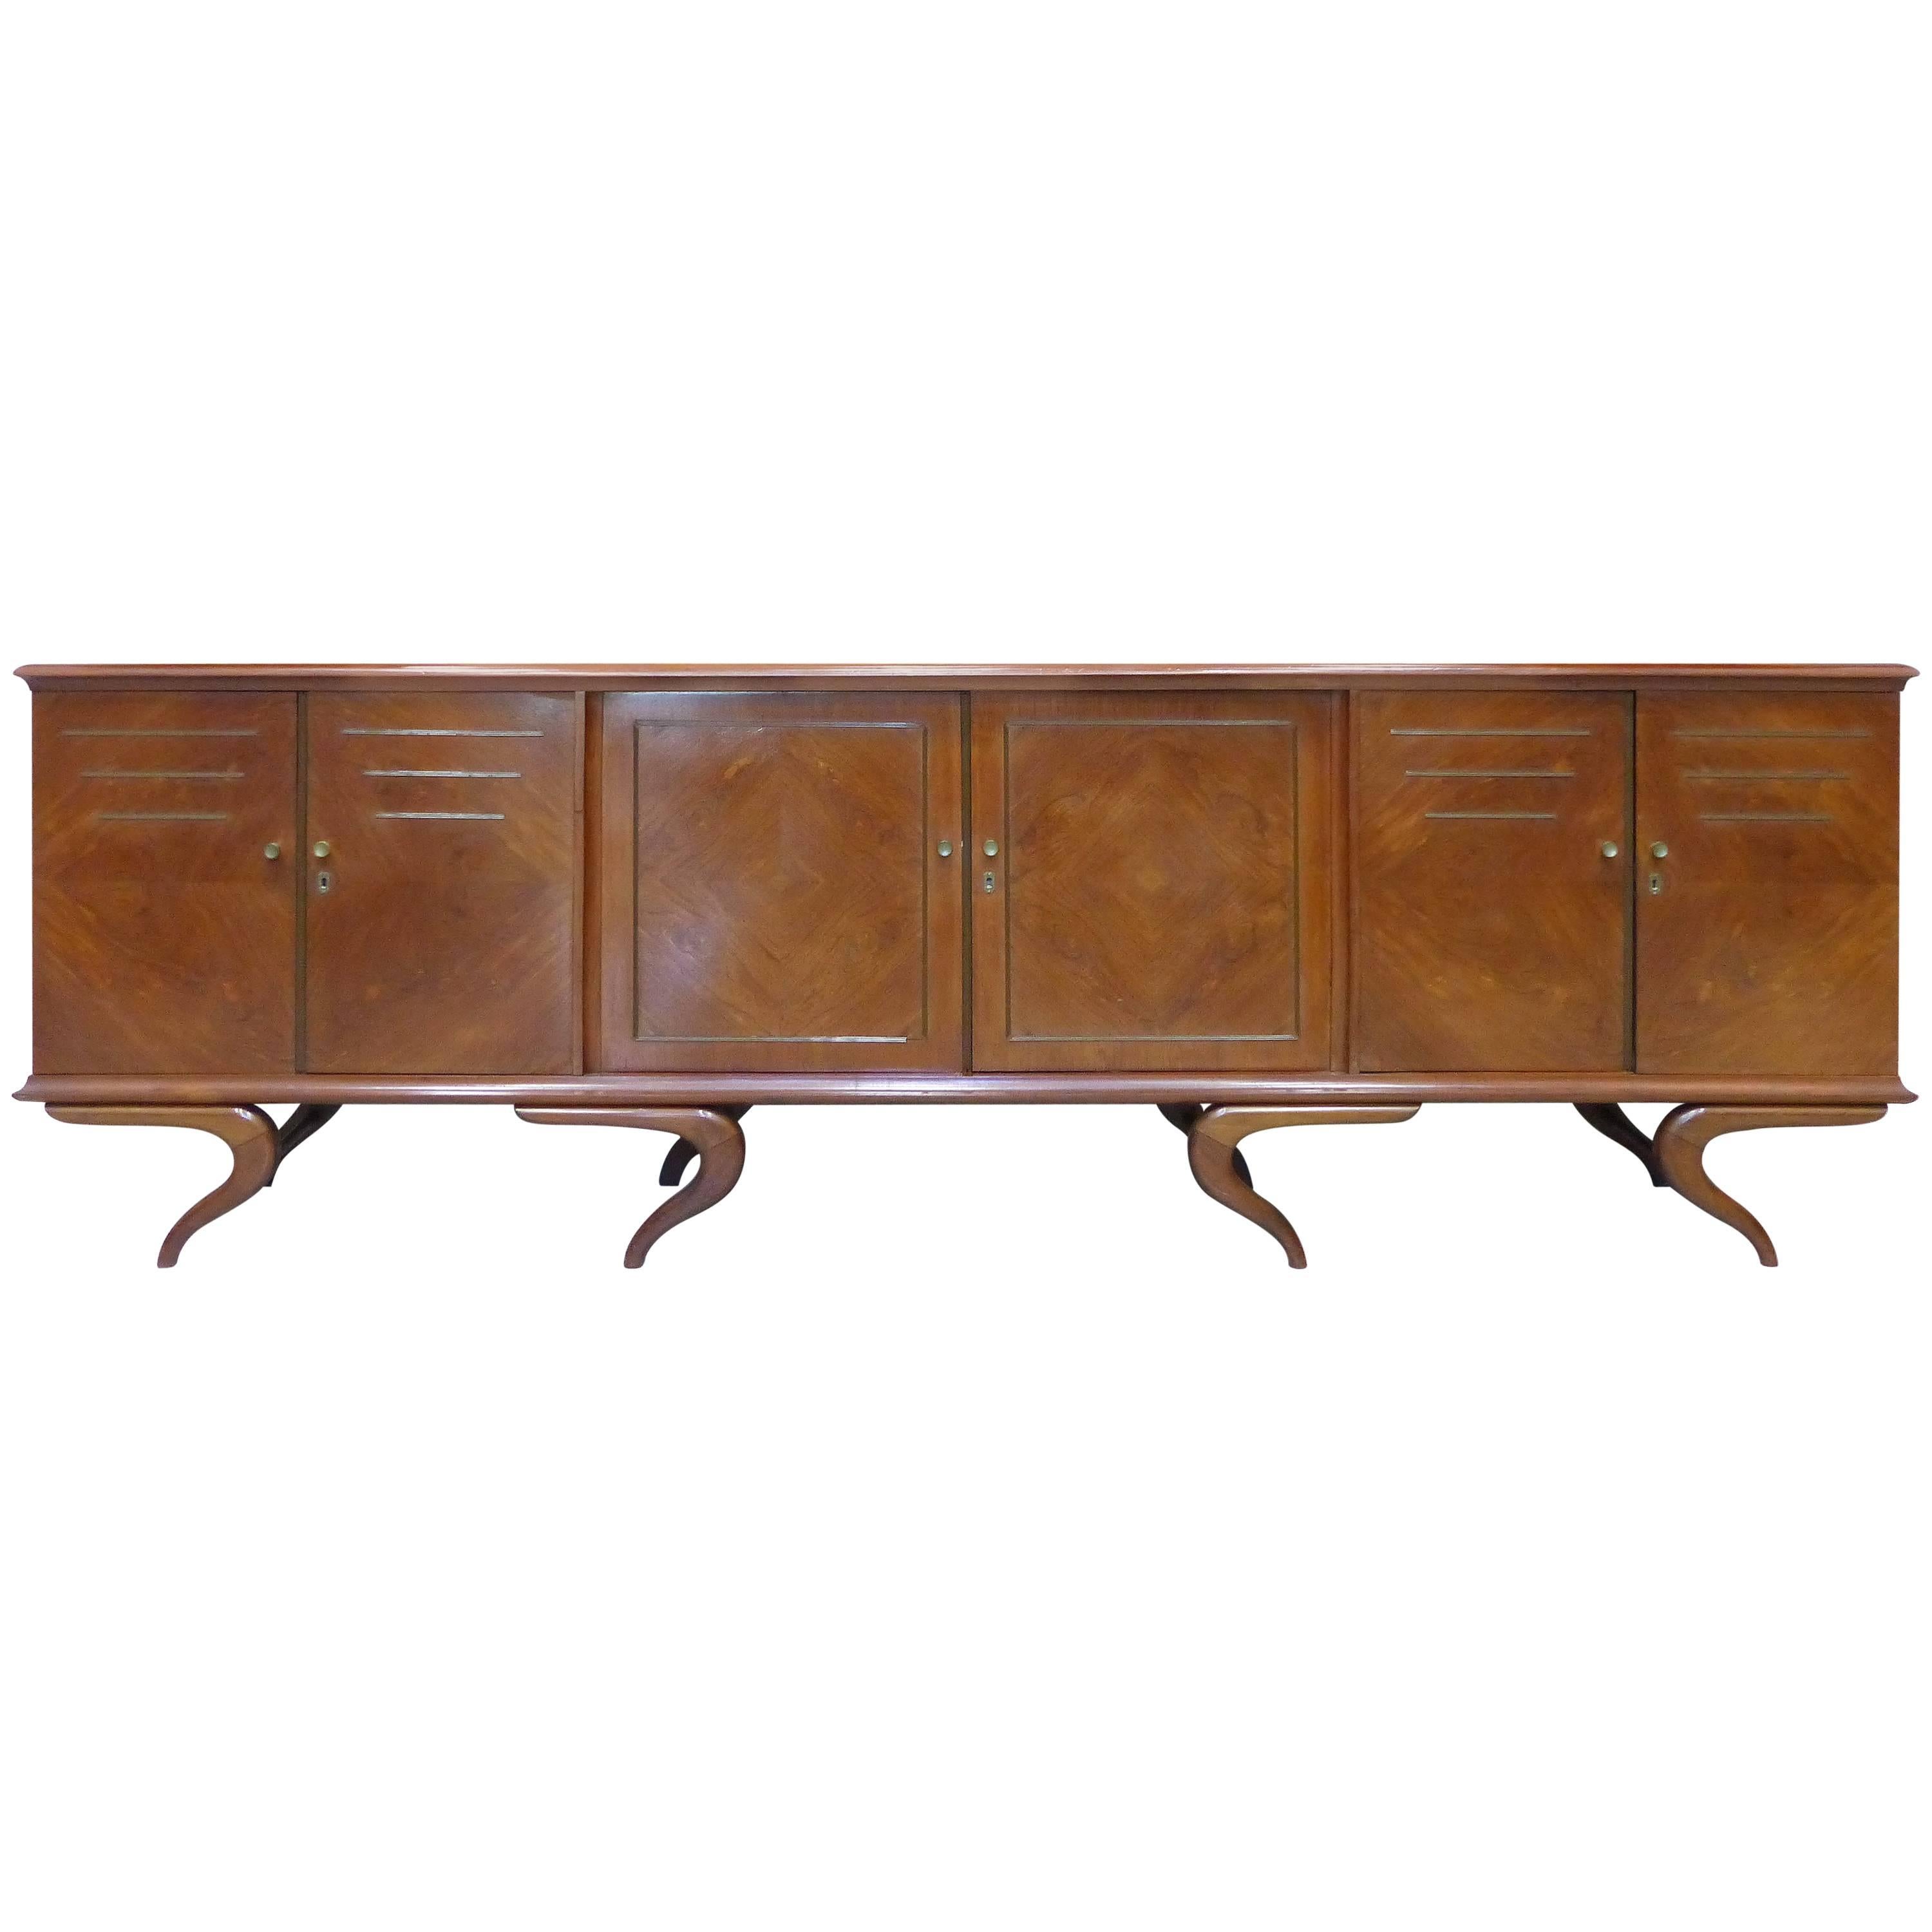 Giuseppe Scapinelli Sculptural Credenza, Monumental and Important, circa 1960